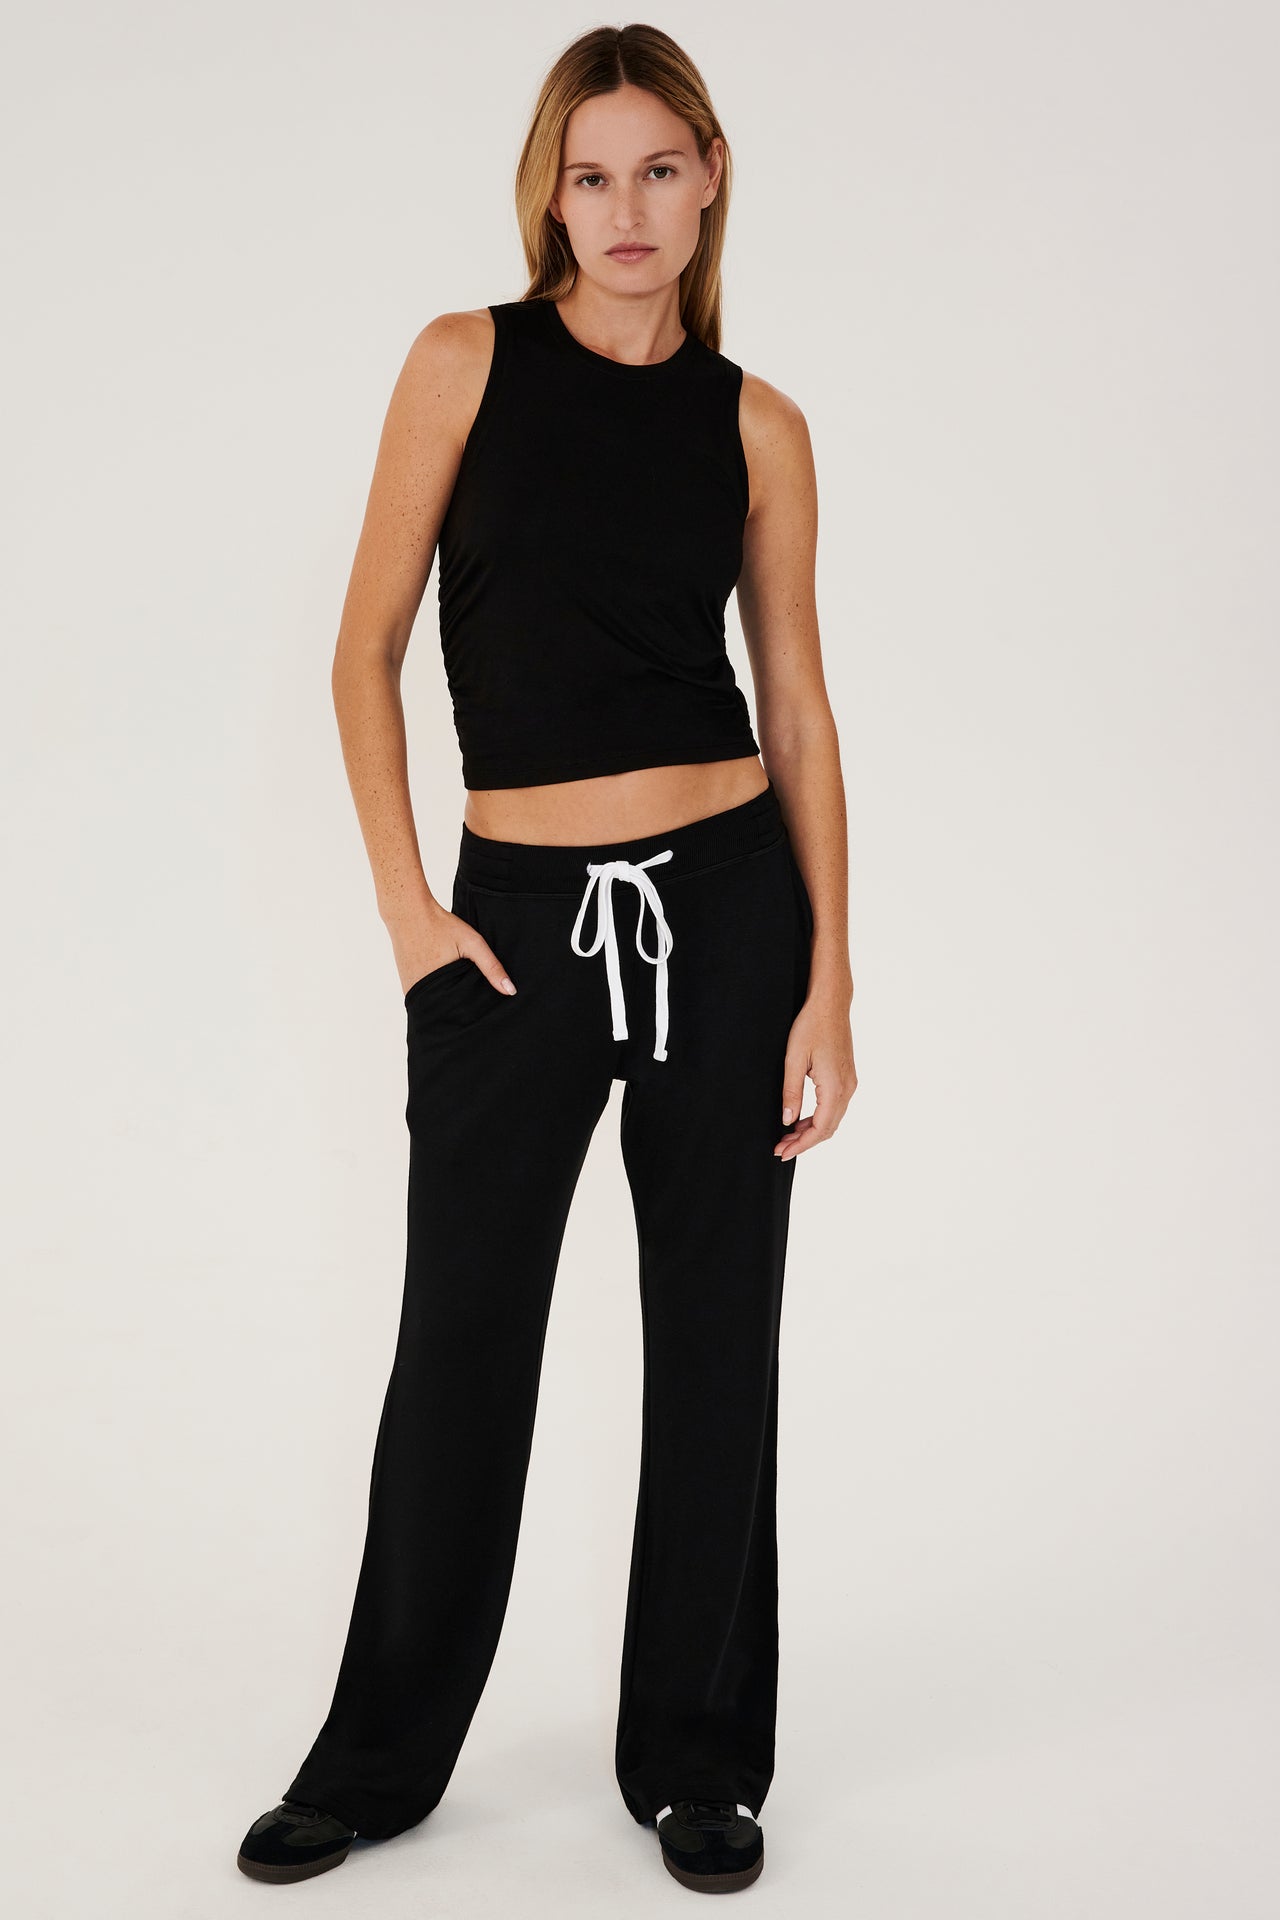 Full front view of woman with straight blonde hair wearing a black high rise wide leg relaxed fit sweatpant with side pockets and white drawstring. With black  high neckline racer tank top. Paired with black shoes with white stripes.